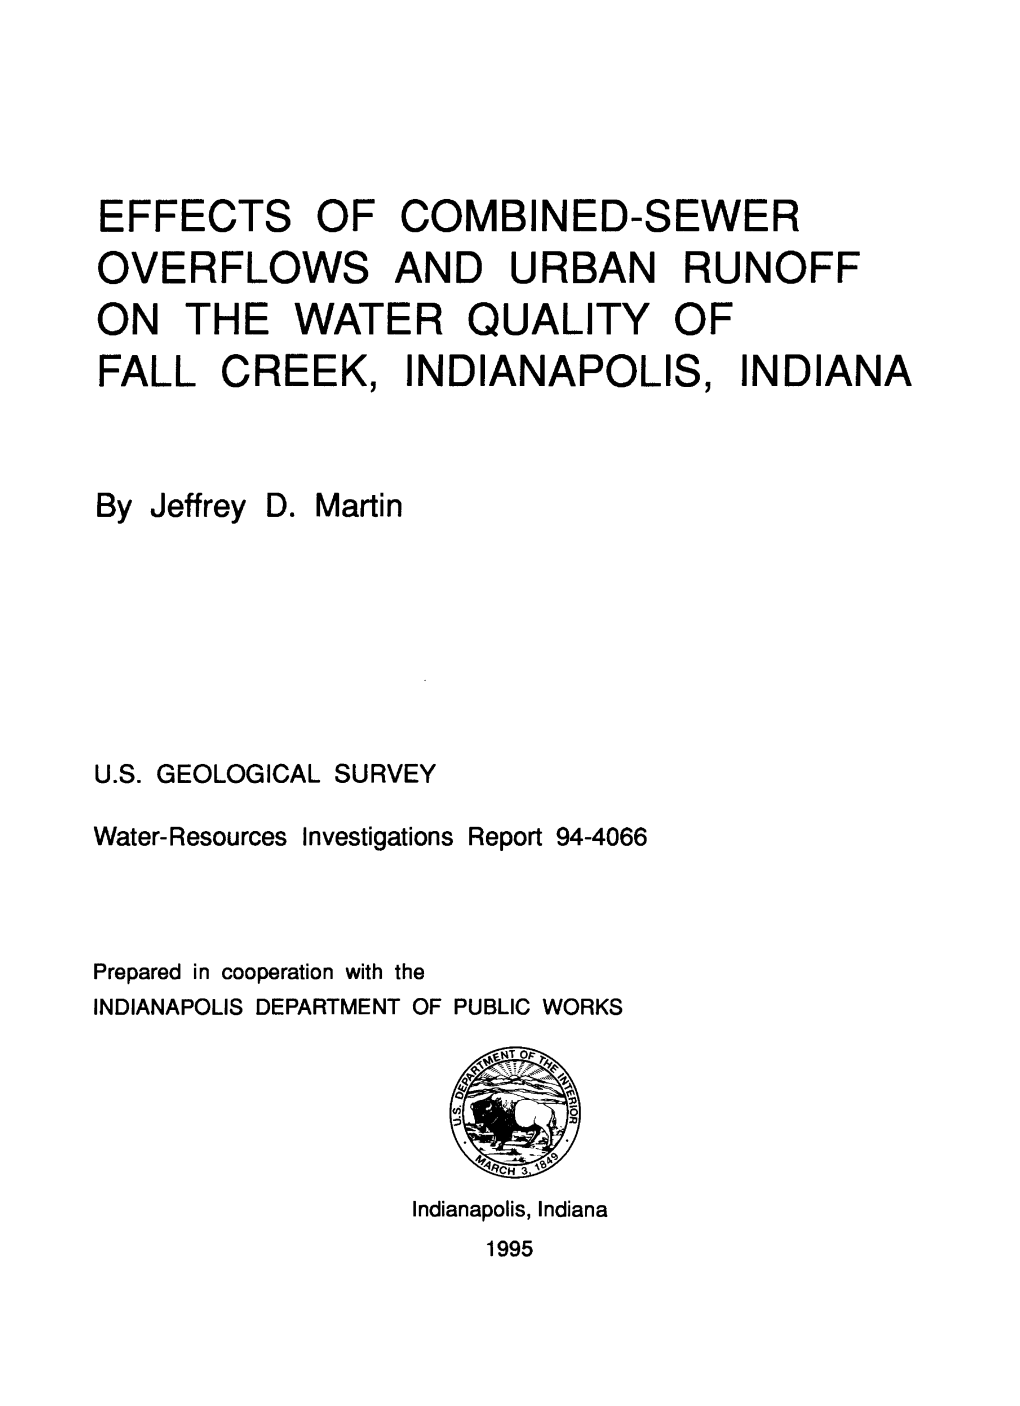 Effects of Combined-Sewer Overflows and Urban Runoff on the Water Quality of Fall Creek, Indianapolis, Indiana